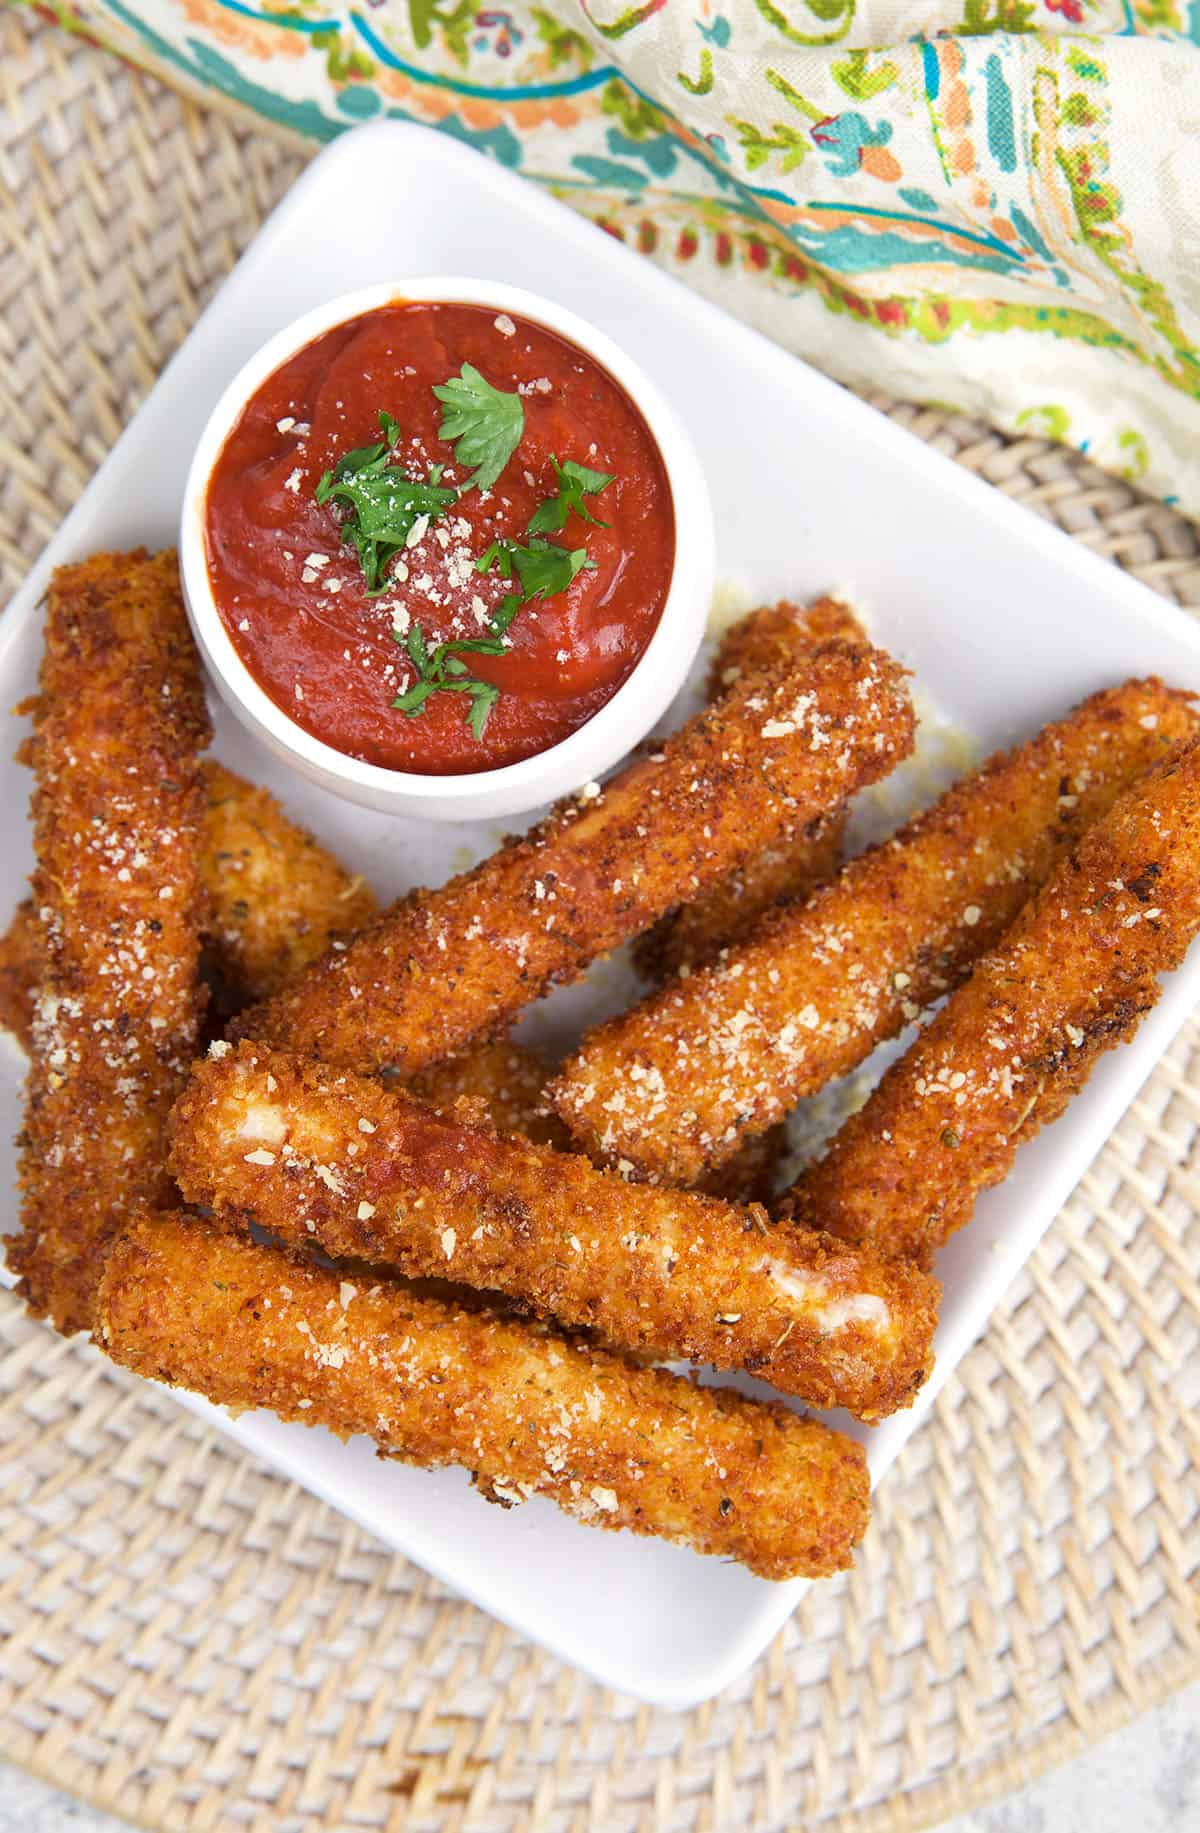 Mozzarella sticks are placed on a white plate next to a small bowl of red sauce.